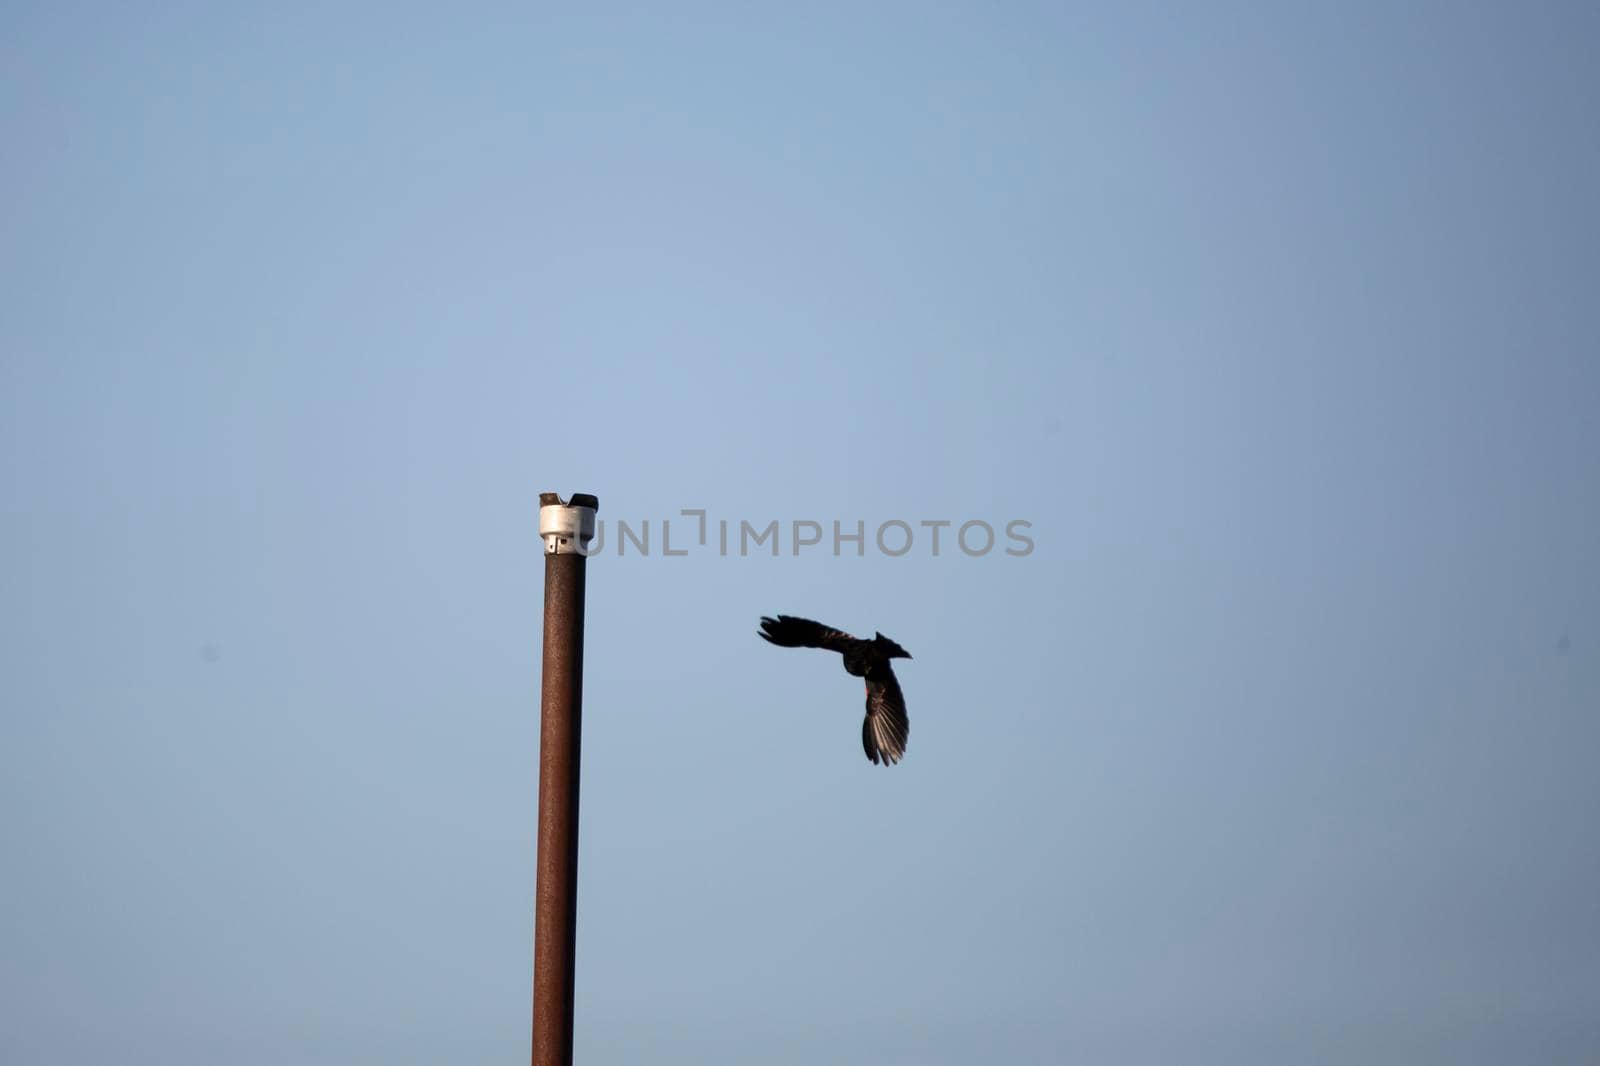 Male red-winged blackbird (Agelaius phoeniceus) flying near a tall metal post